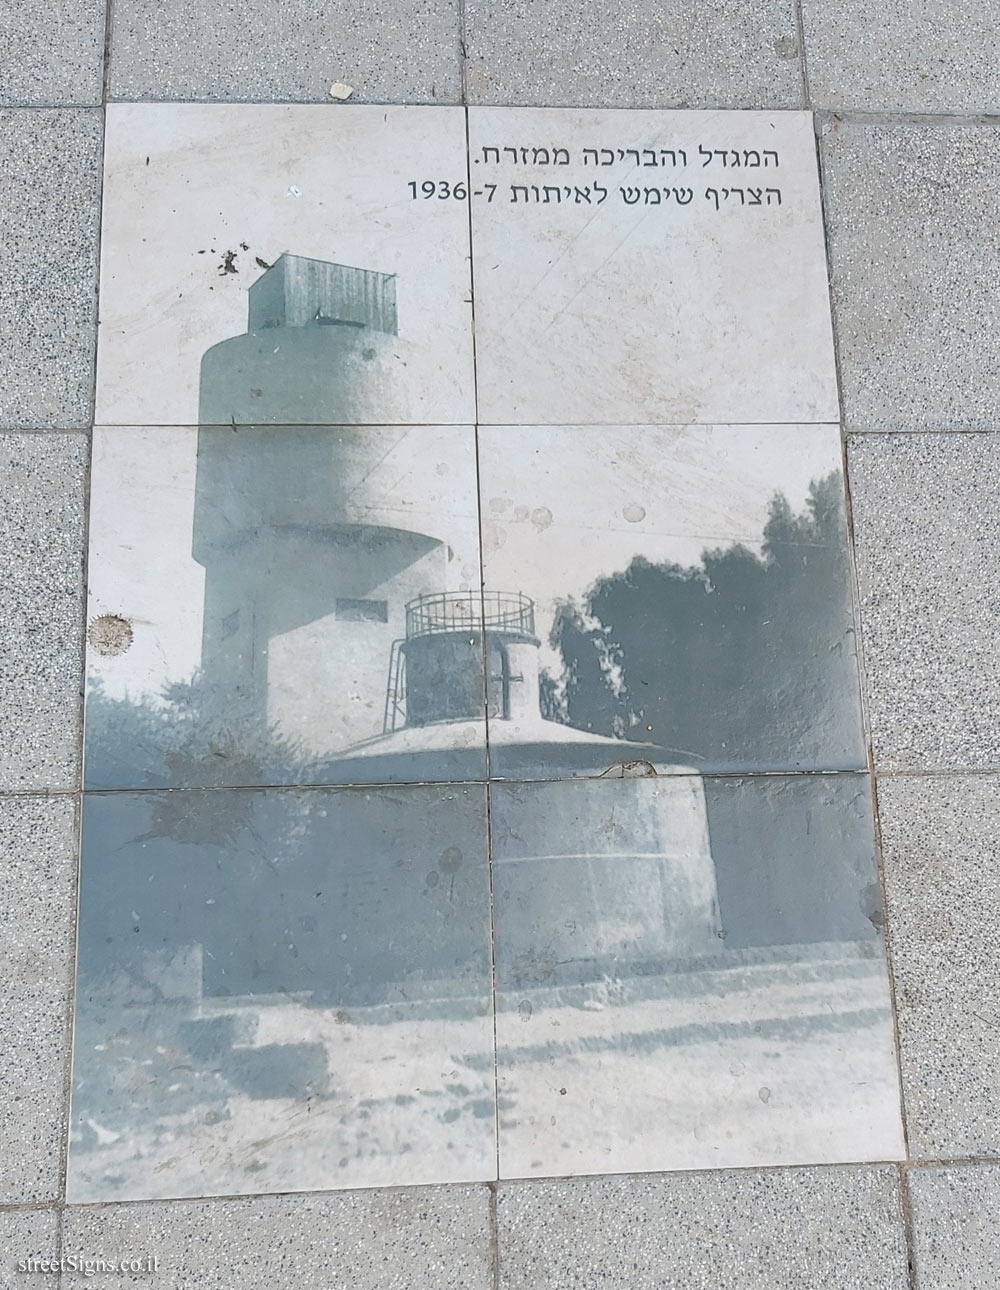 Hadera - Historical photos - The water tower and the pool